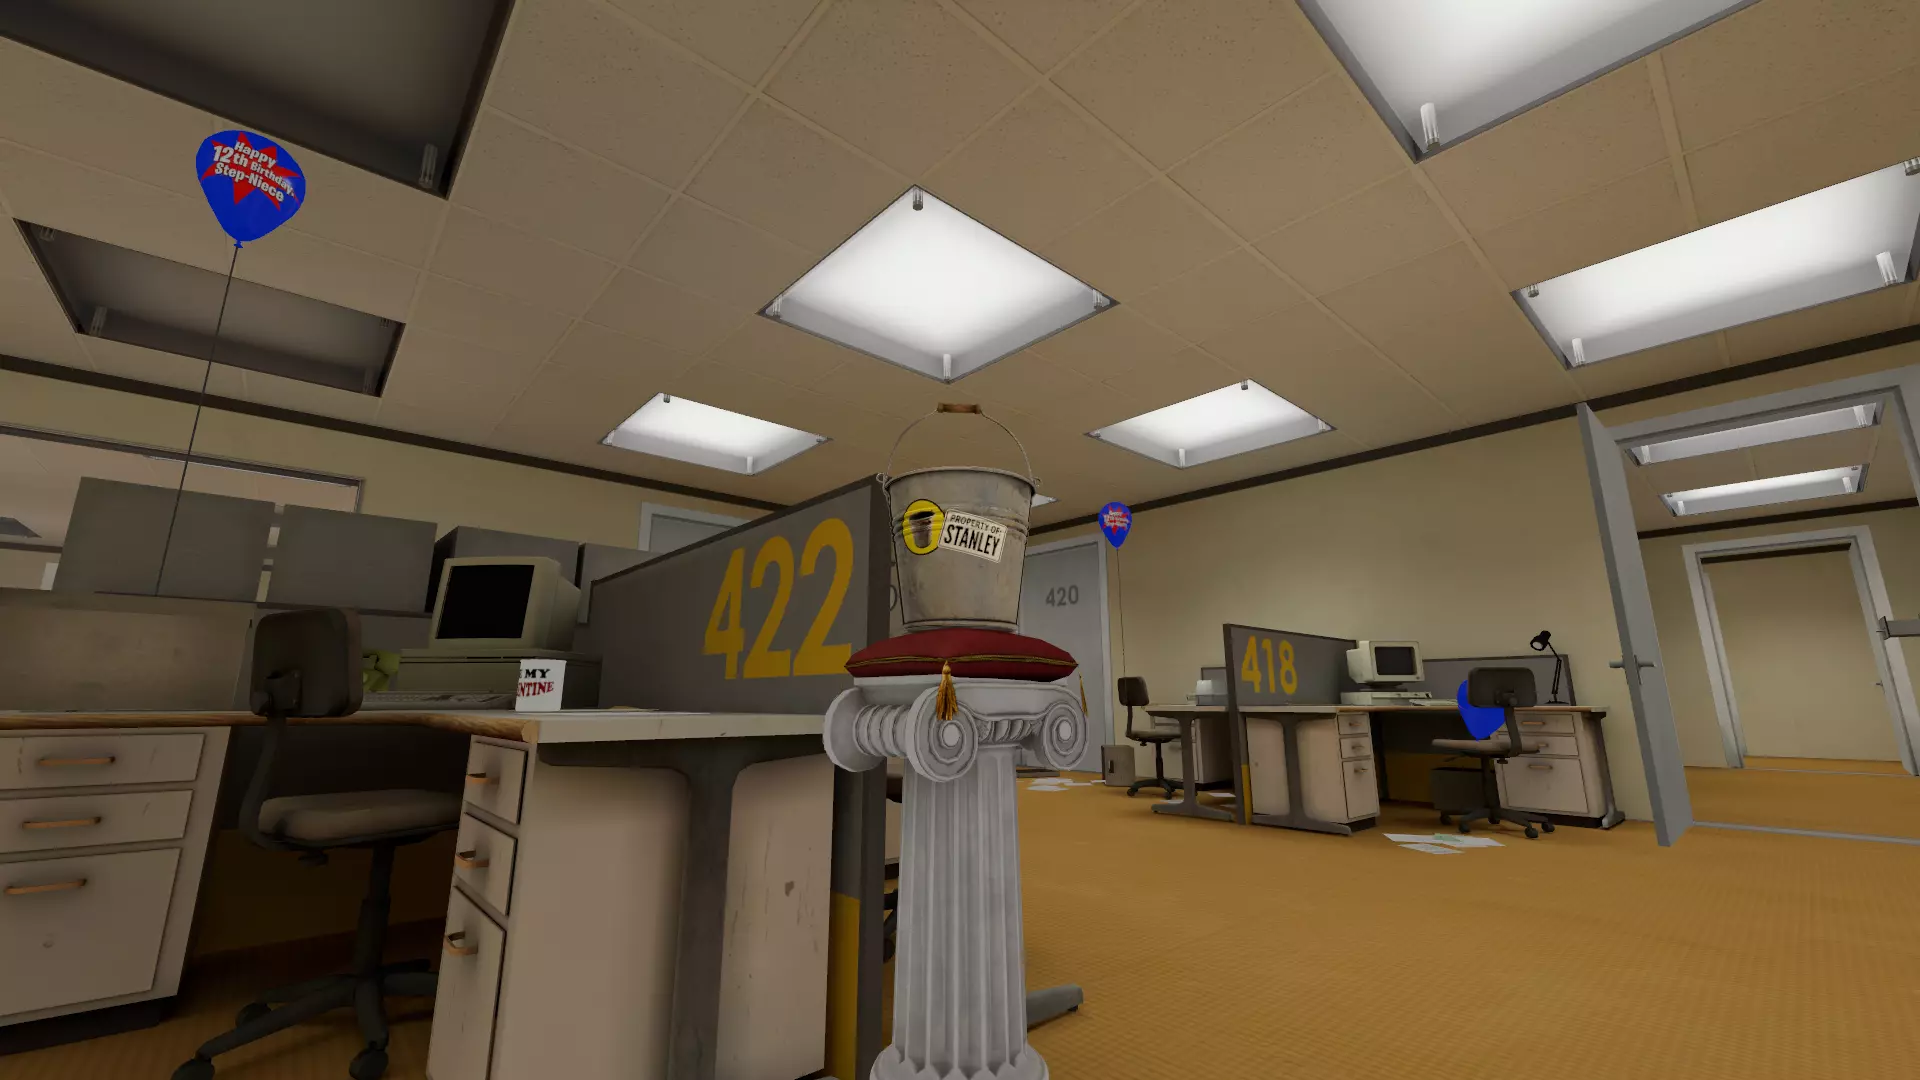 Buy The Stanley Parable: Ultra Deluxe